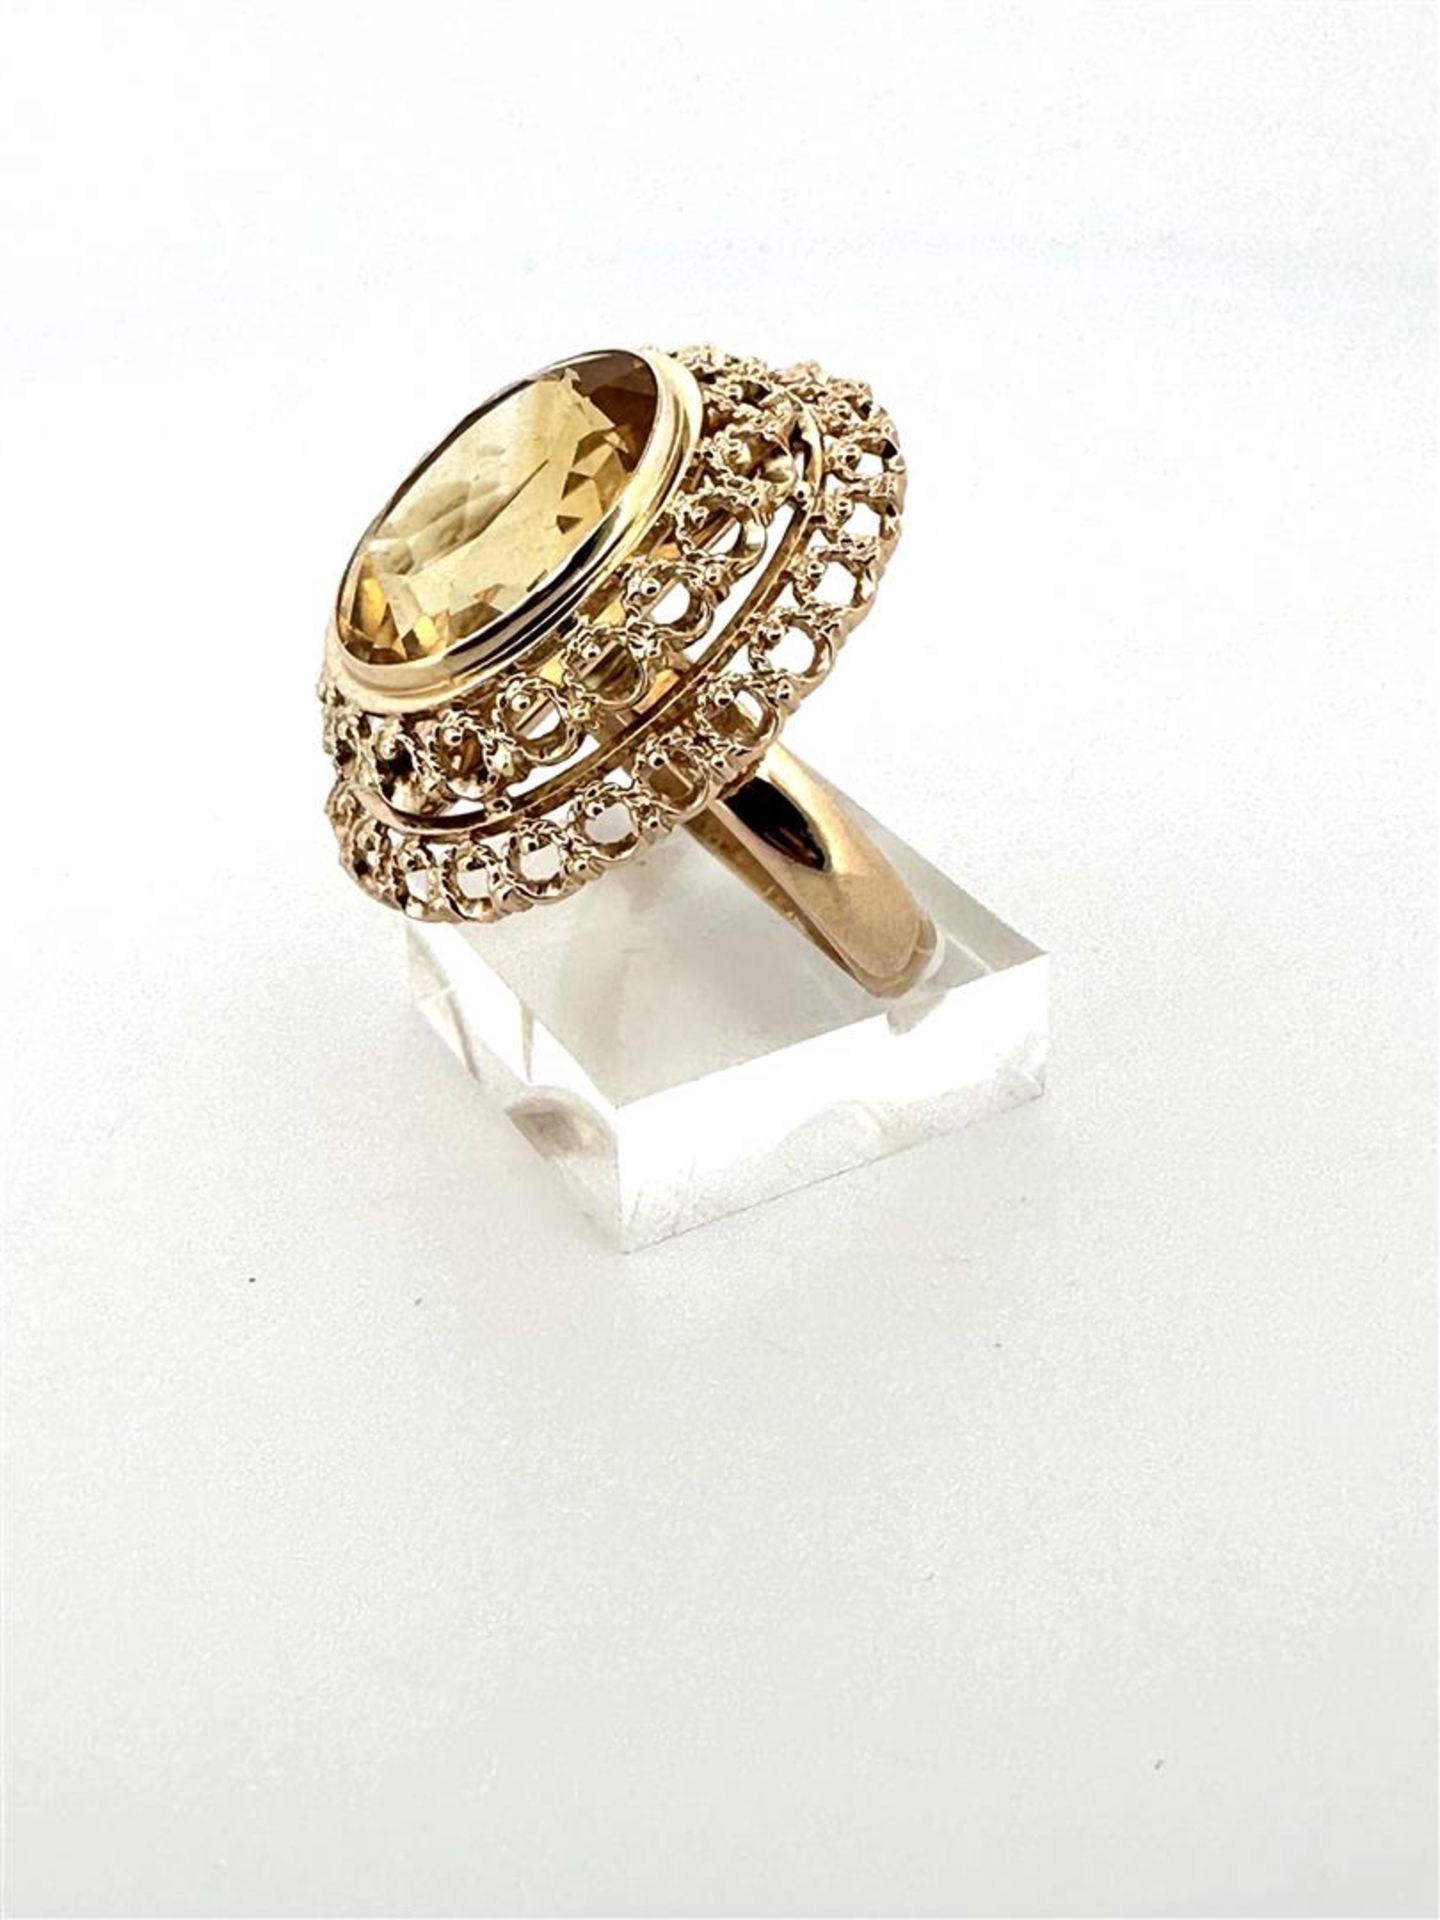 14kt yellow gold statement cocktail ring with citrine. 
The ring has a beautiful openwork double edg - Bild 3 aus 6